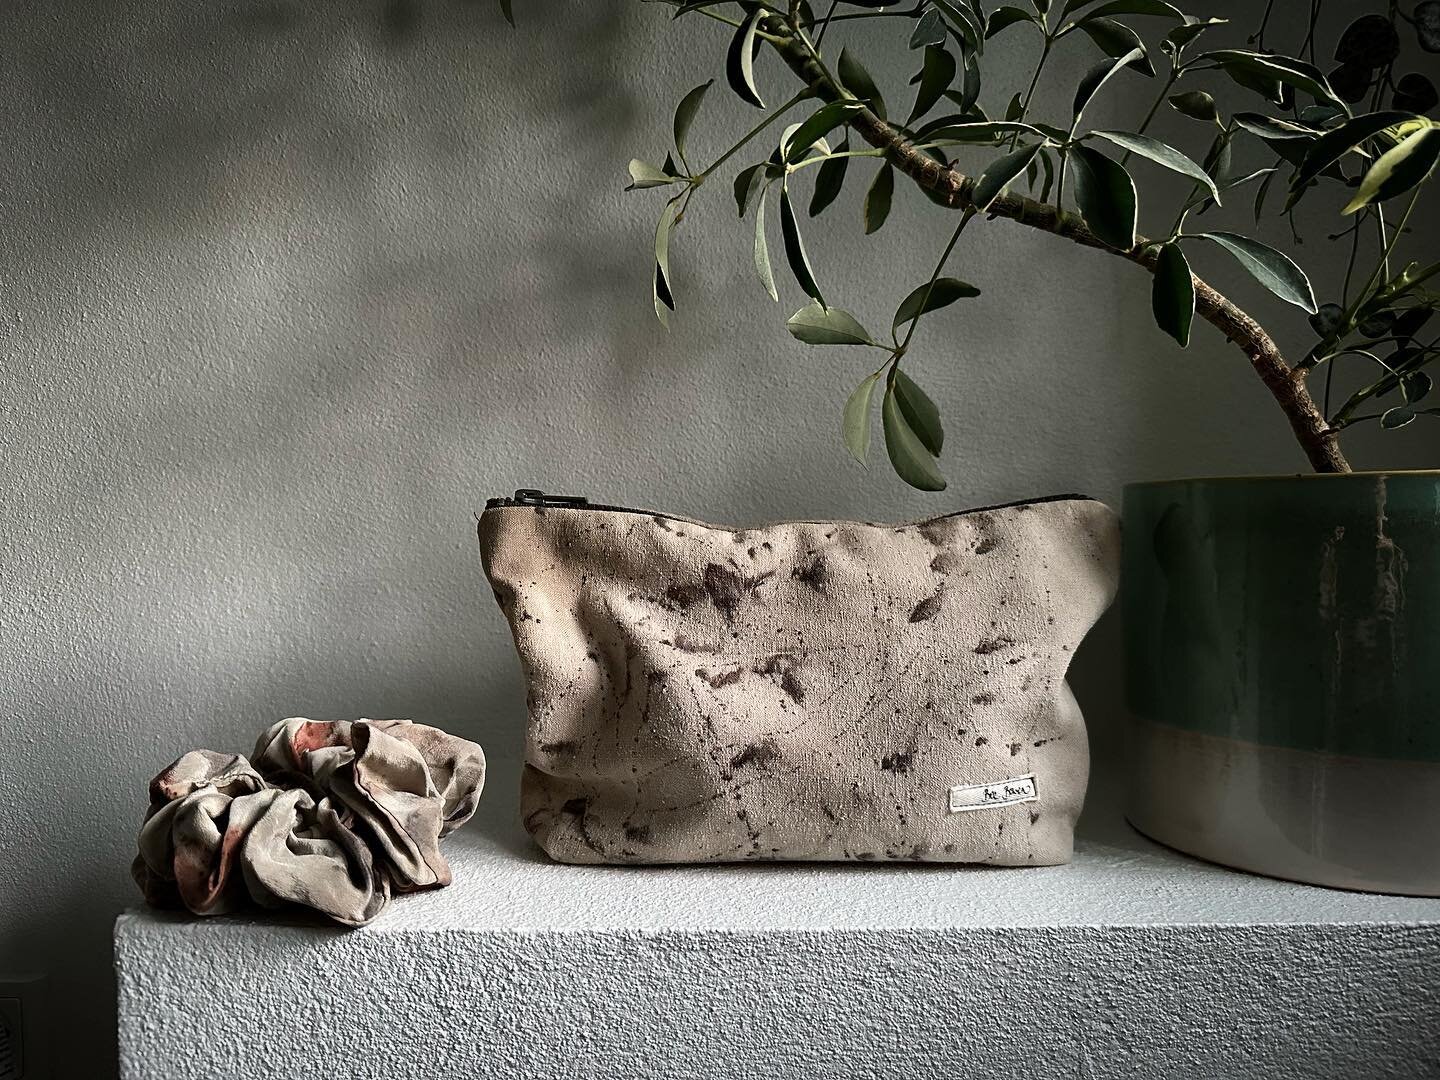 Leaf printed silk scrunchy and silk pouch - perfect companions for an Easter break with my lovely cousin and well suited to her perfectly styled guest bathroom 😍. 
Have a happy Easter 🐣 
#Leafprint #MyLocalDyePlants #Handcrafted #Botanicaldyes  #Ar